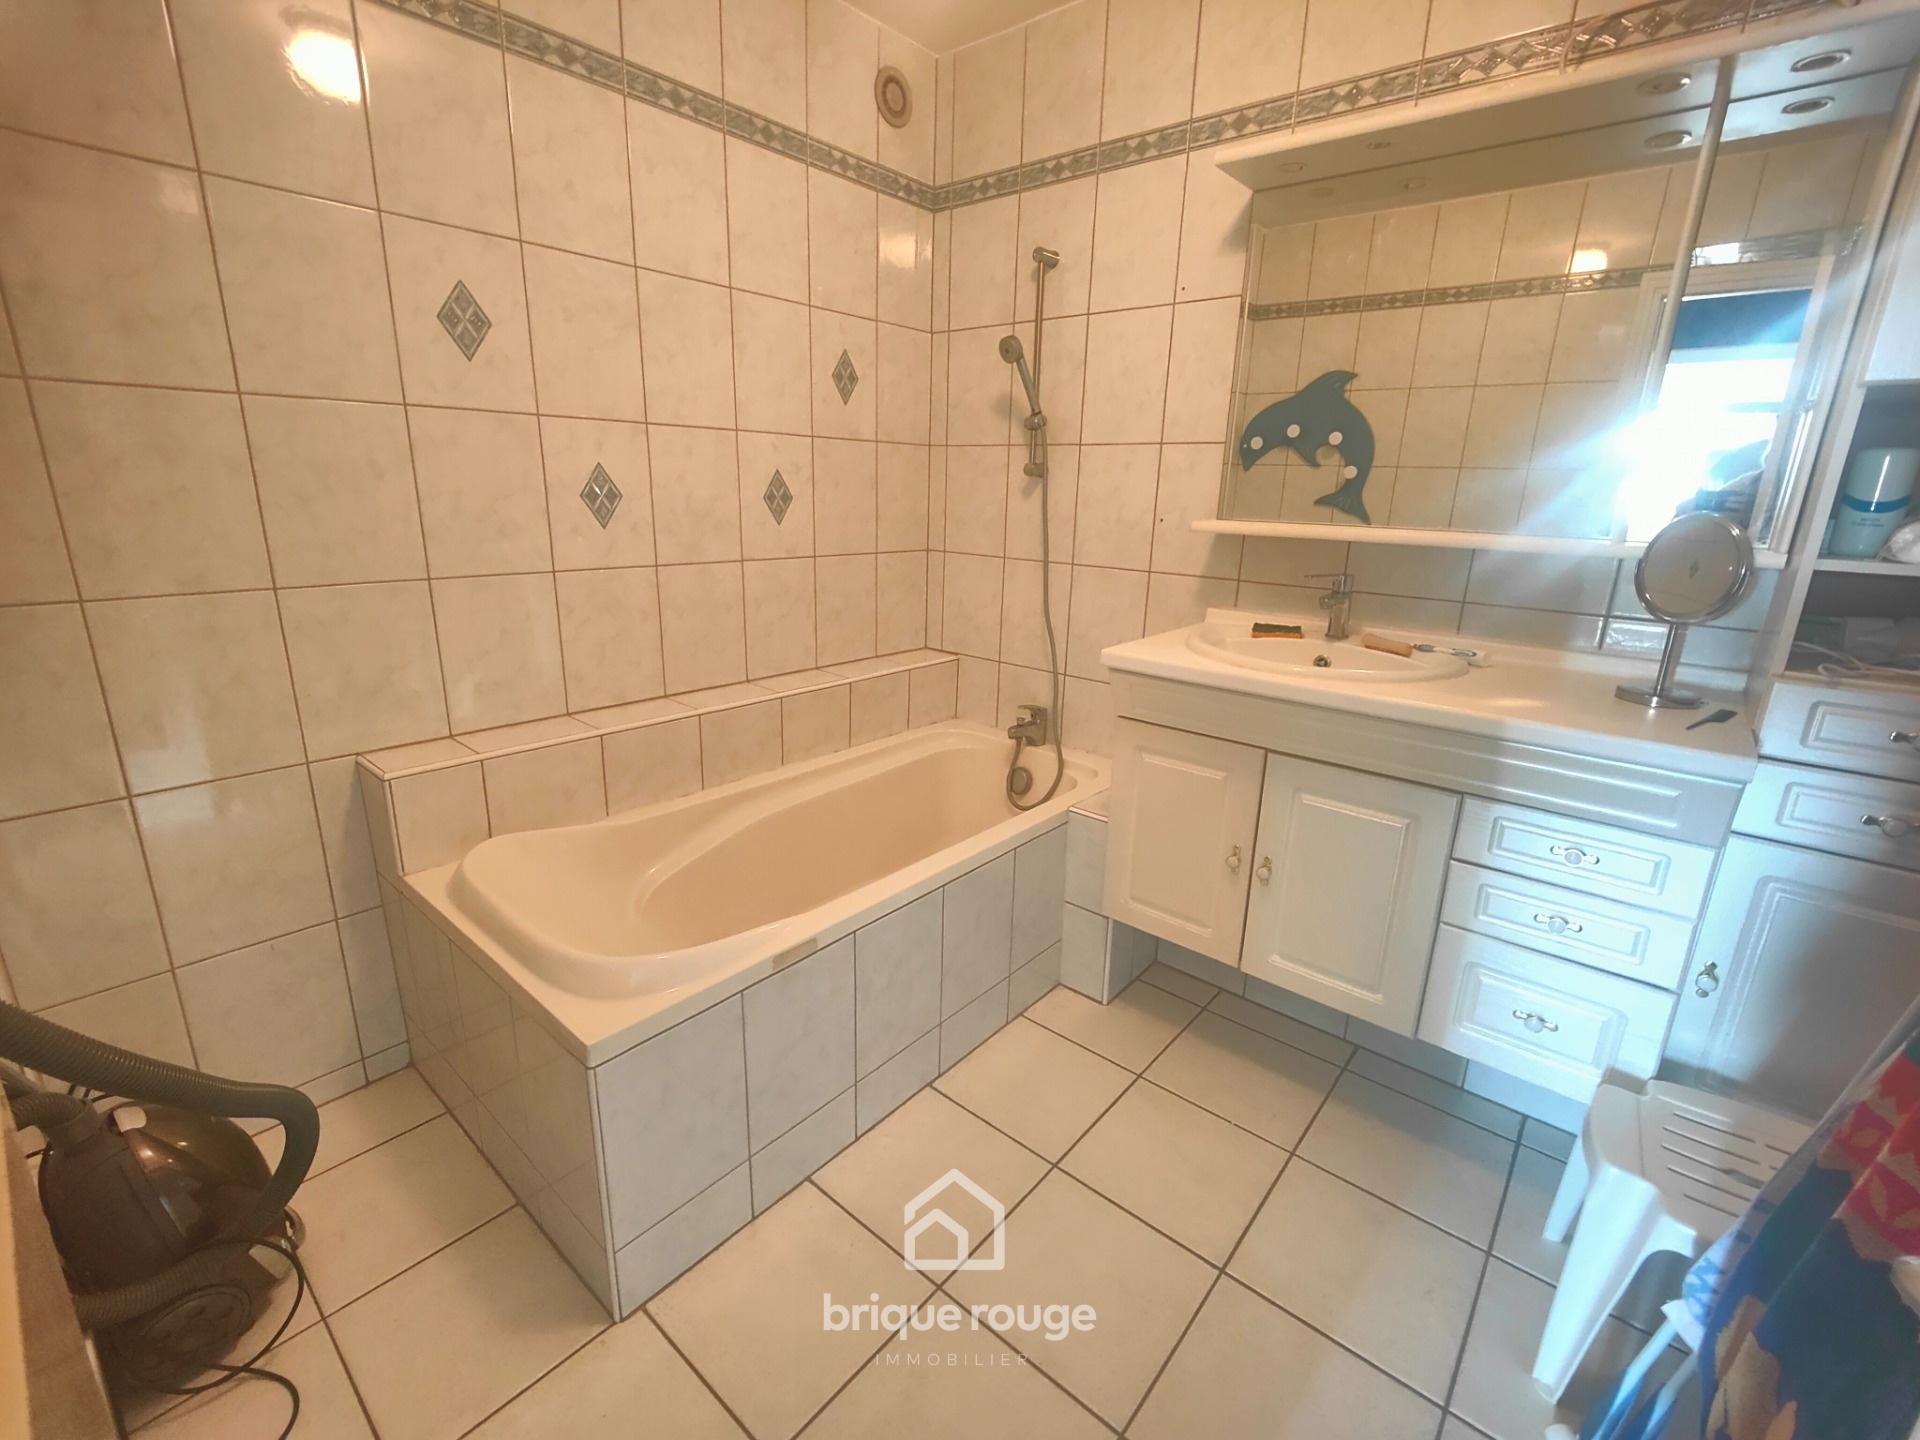 Loos  5 mn chr beau t3 avec garage  residence  securisee Photo 7 - Brique Rouge Immobilier